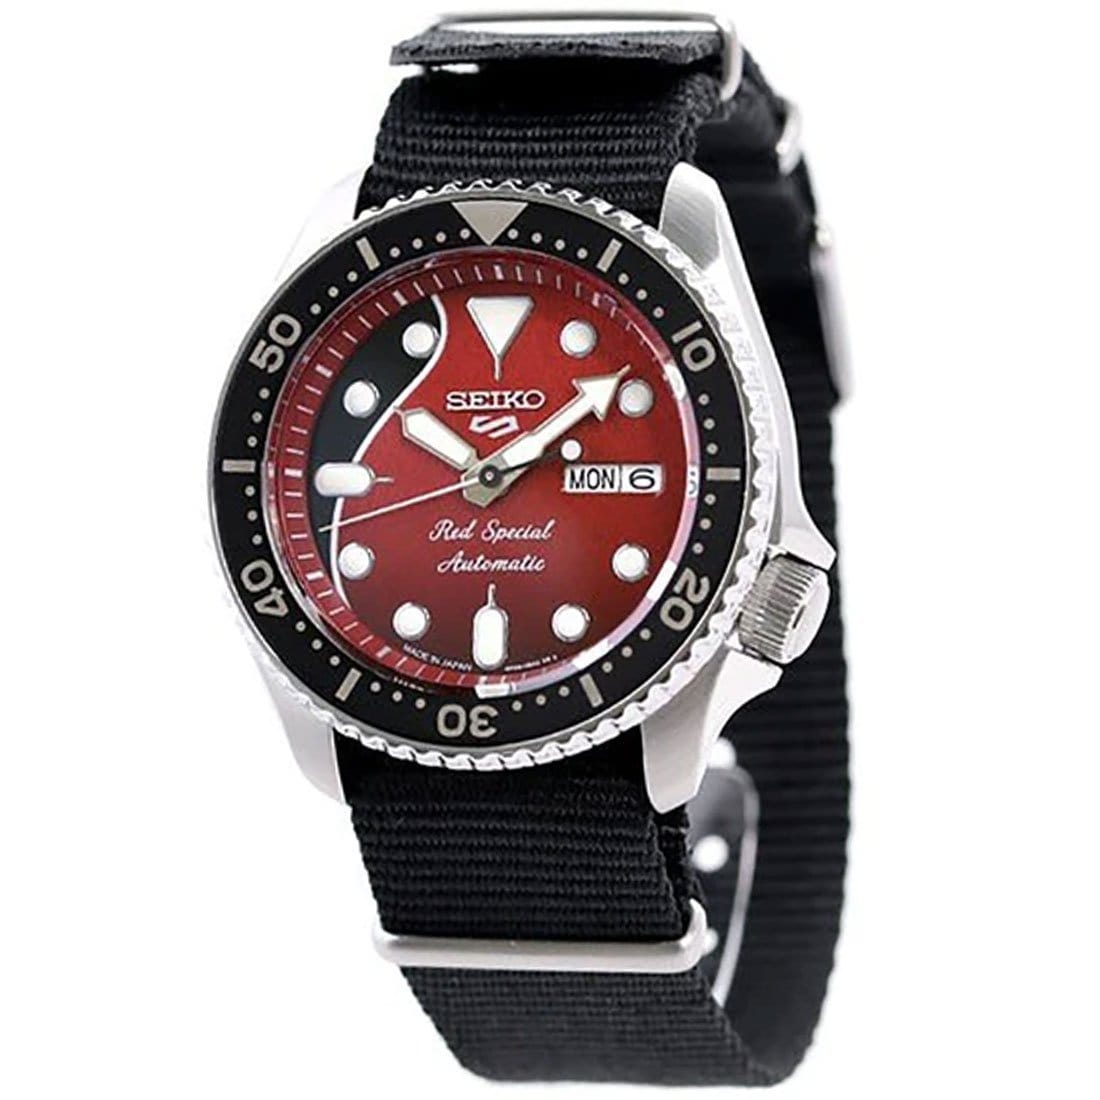 SRPE83K1 SRPE83 Seiko 5 Red Special Limited Edition Queen Watch